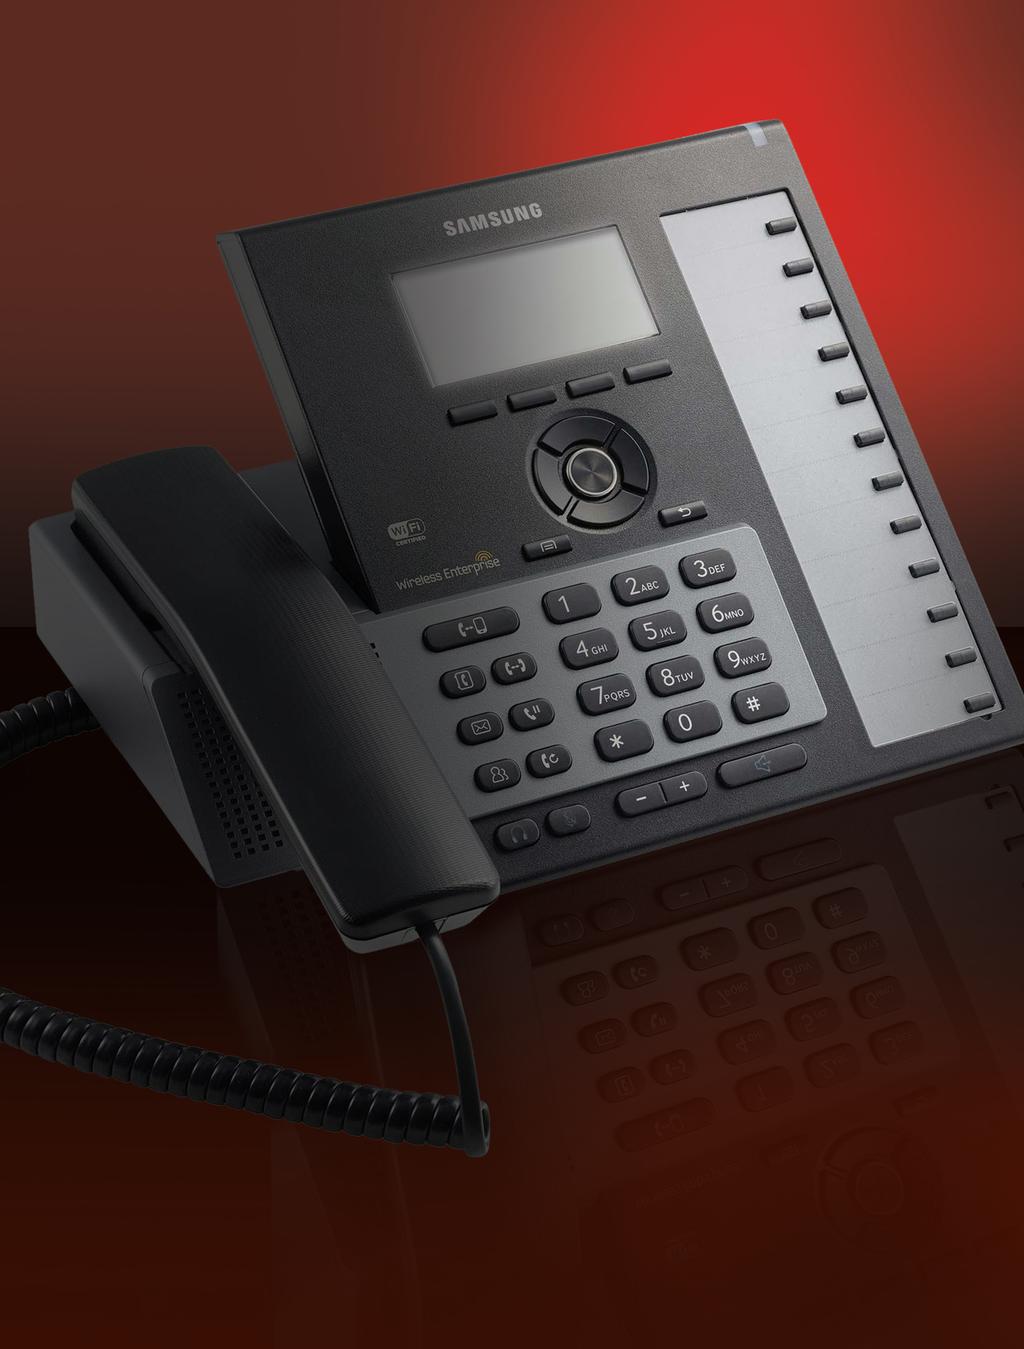 Samsung IP Phones All models in the 6000 series feature wired network connectivity and an ergonomic design including: A distinctive floating handset.